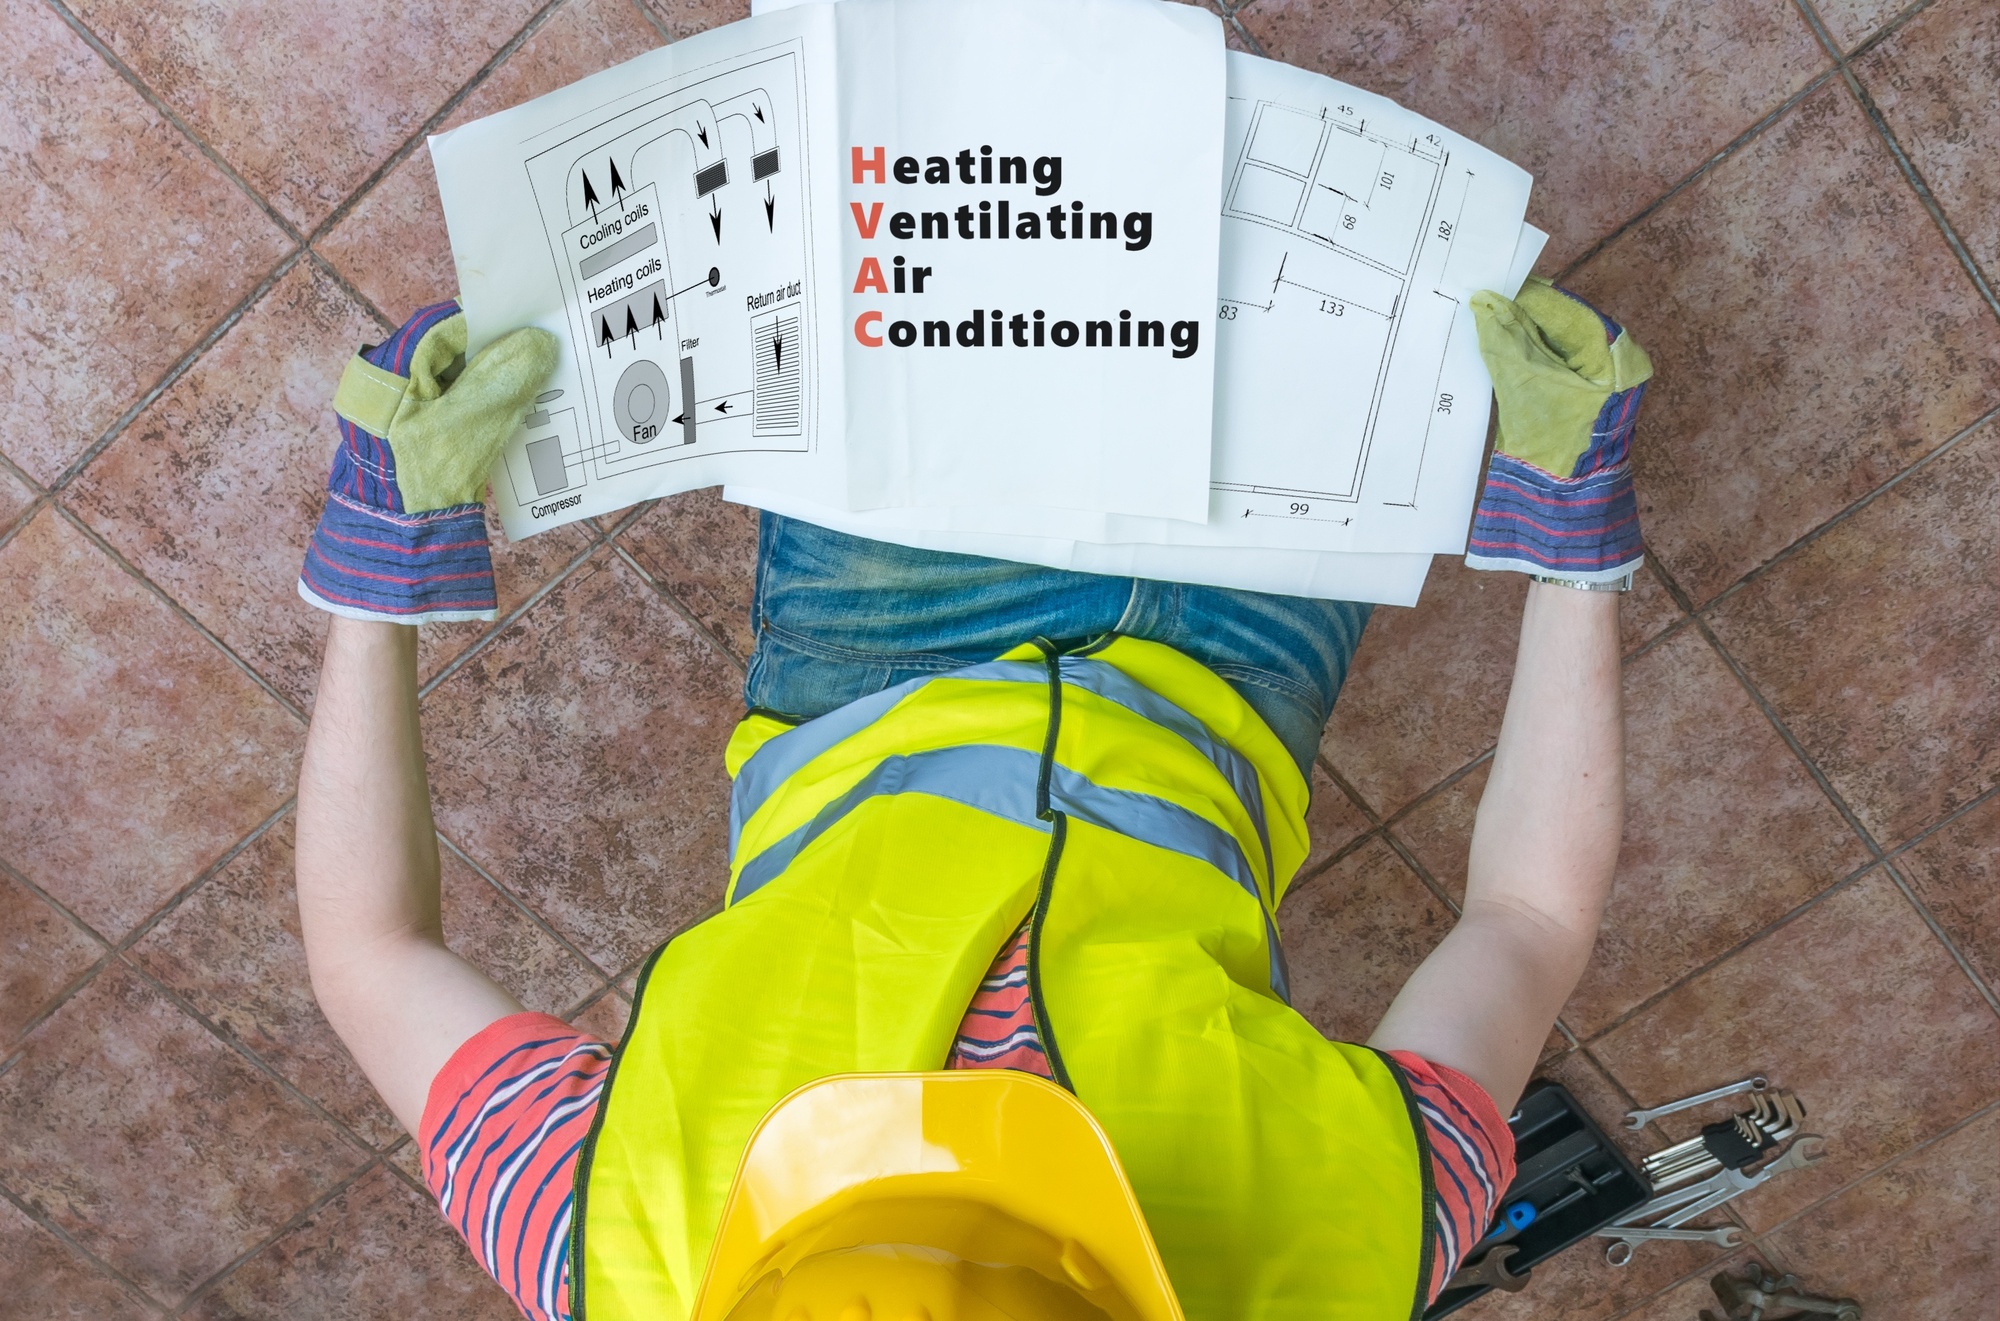 best hvac companies to work for in houston